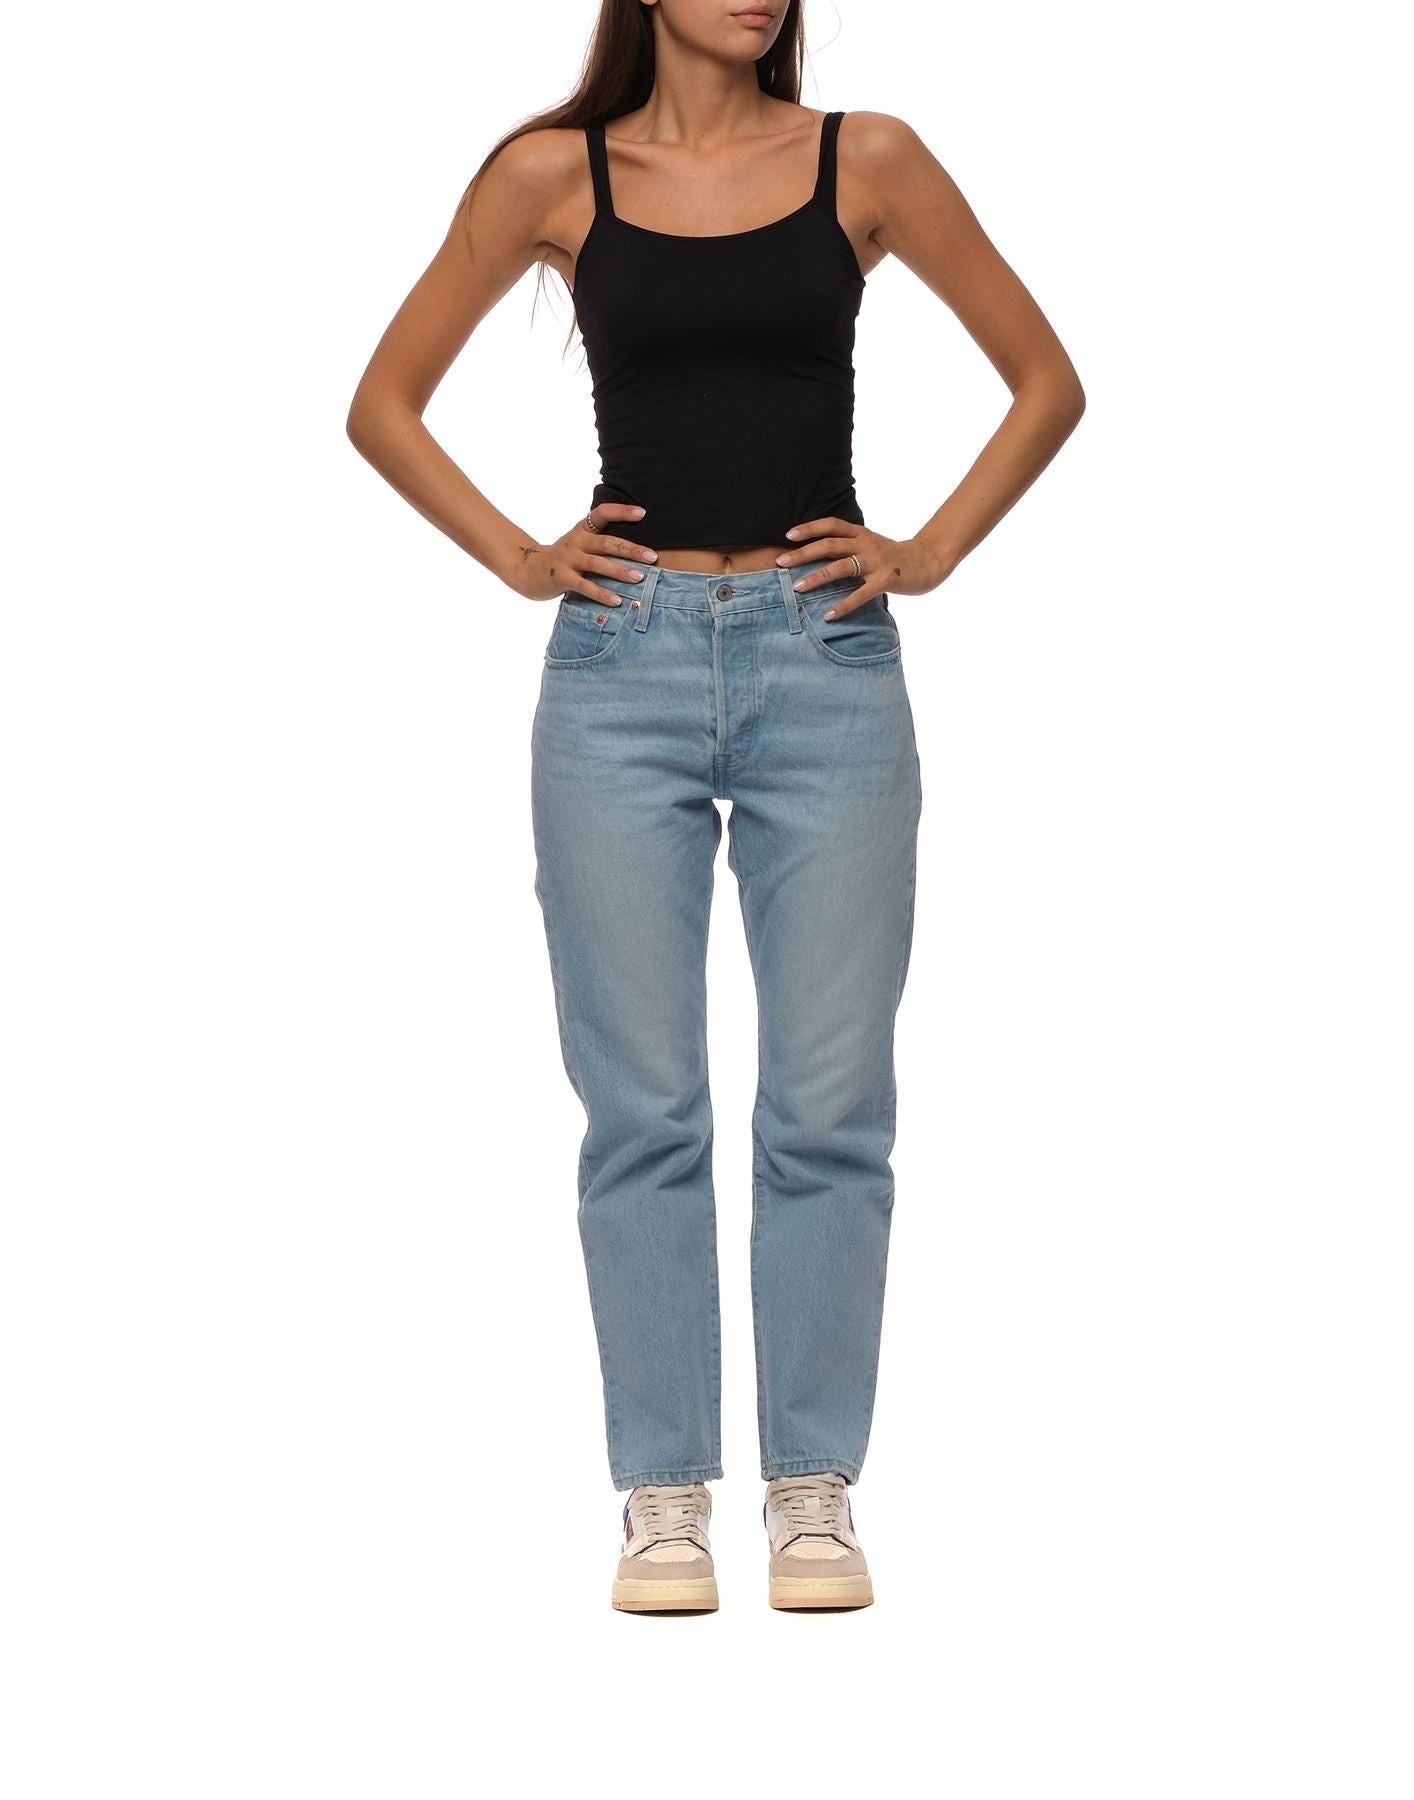 Jeans for woman 36200 0124 OJAI LUXOR Levi's